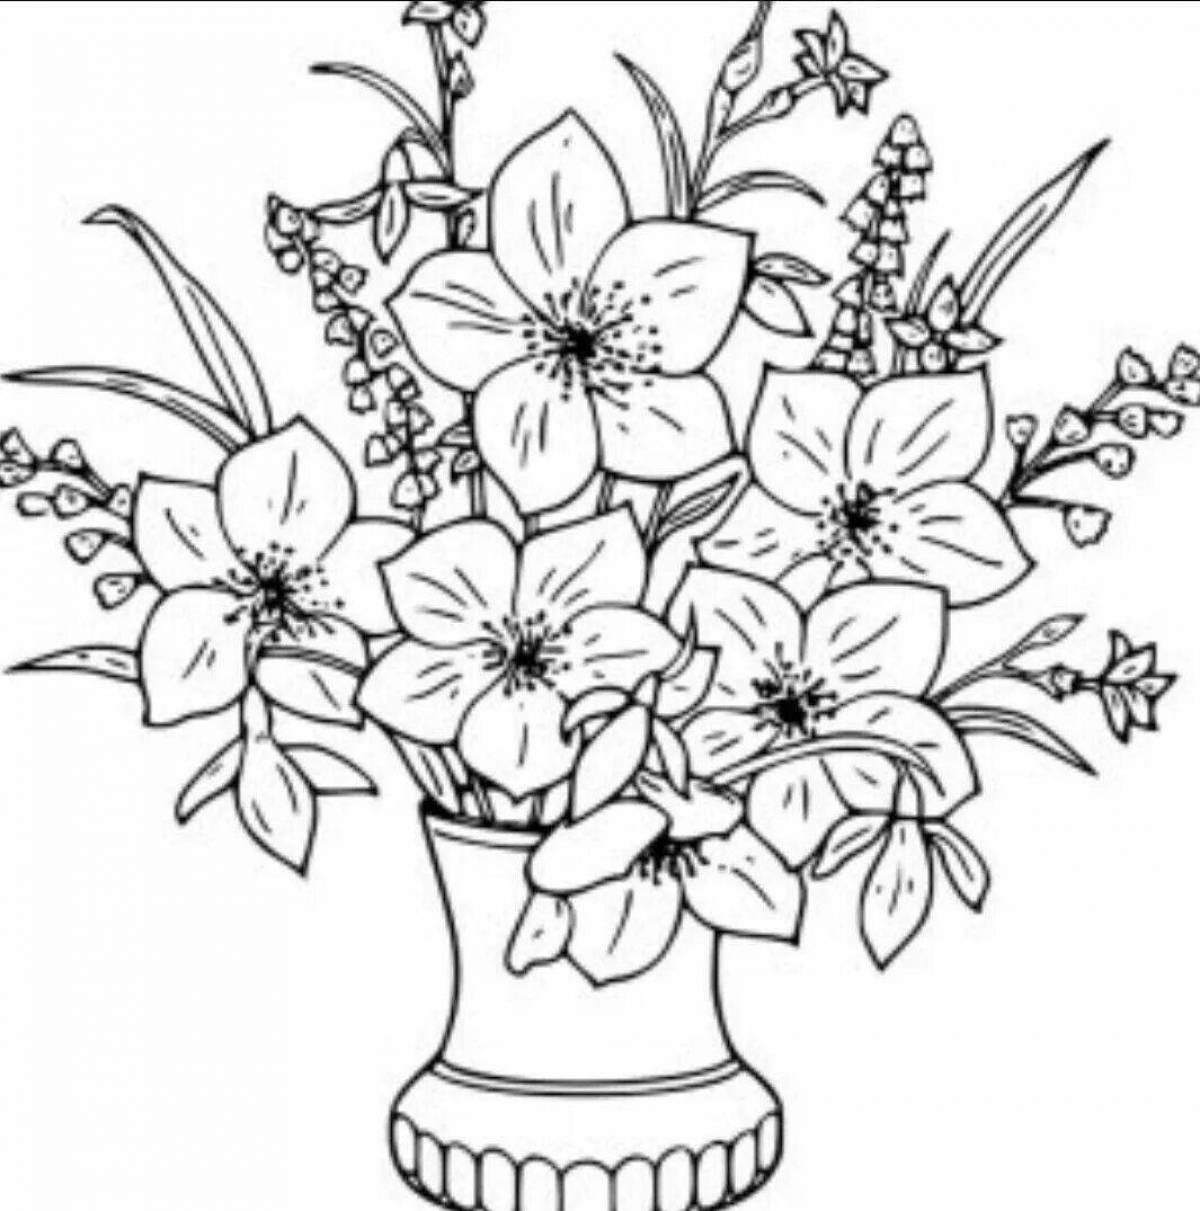 Serene bouquet of flowers in a vase coloring book